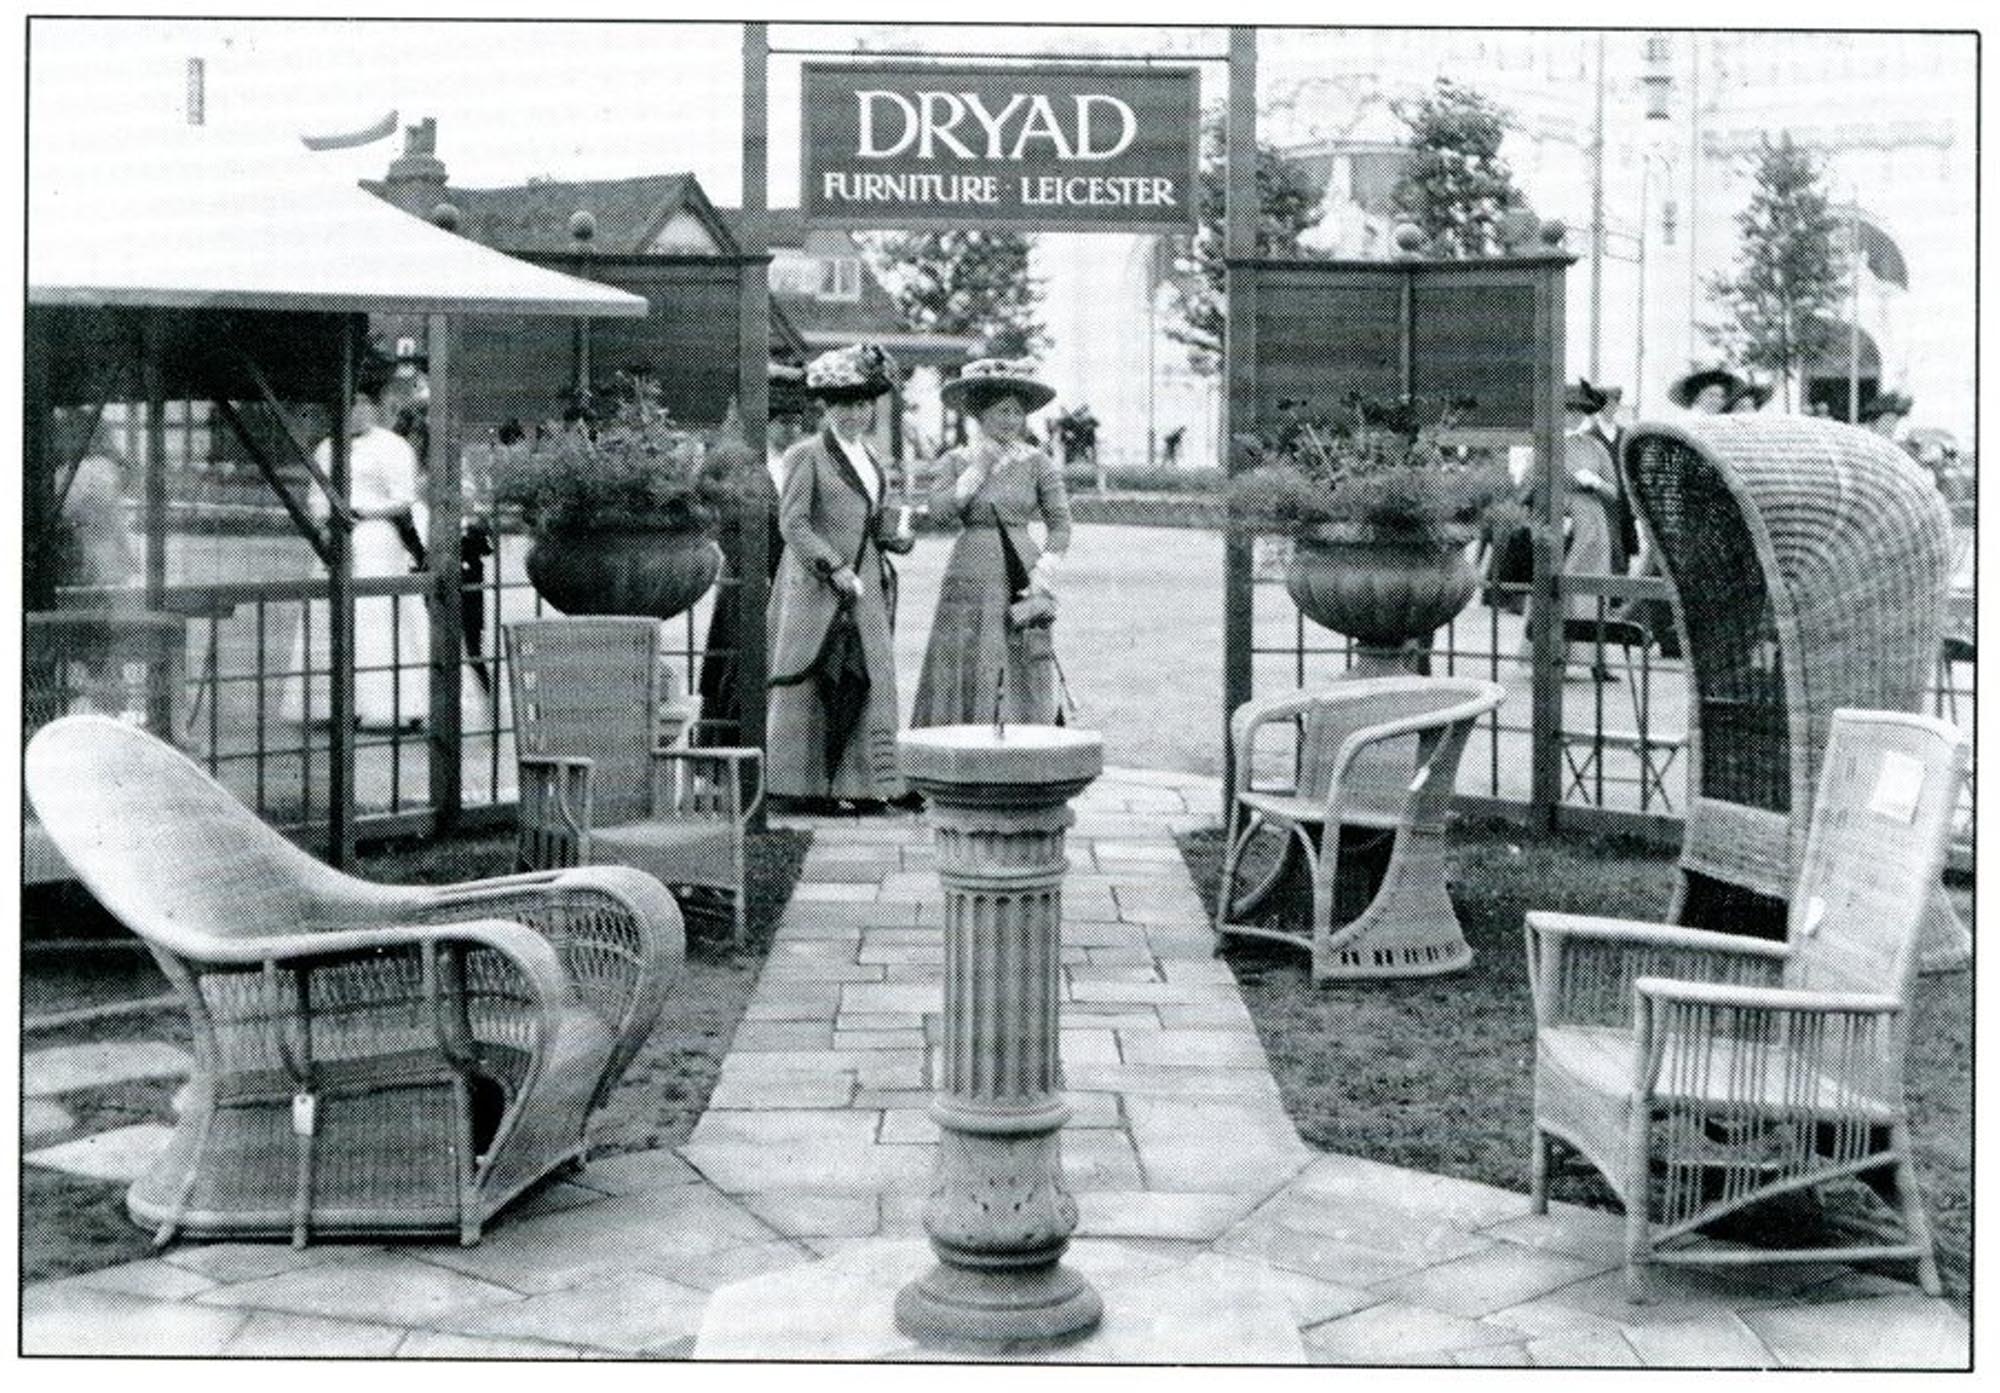 Dryad Furniture Leicester -